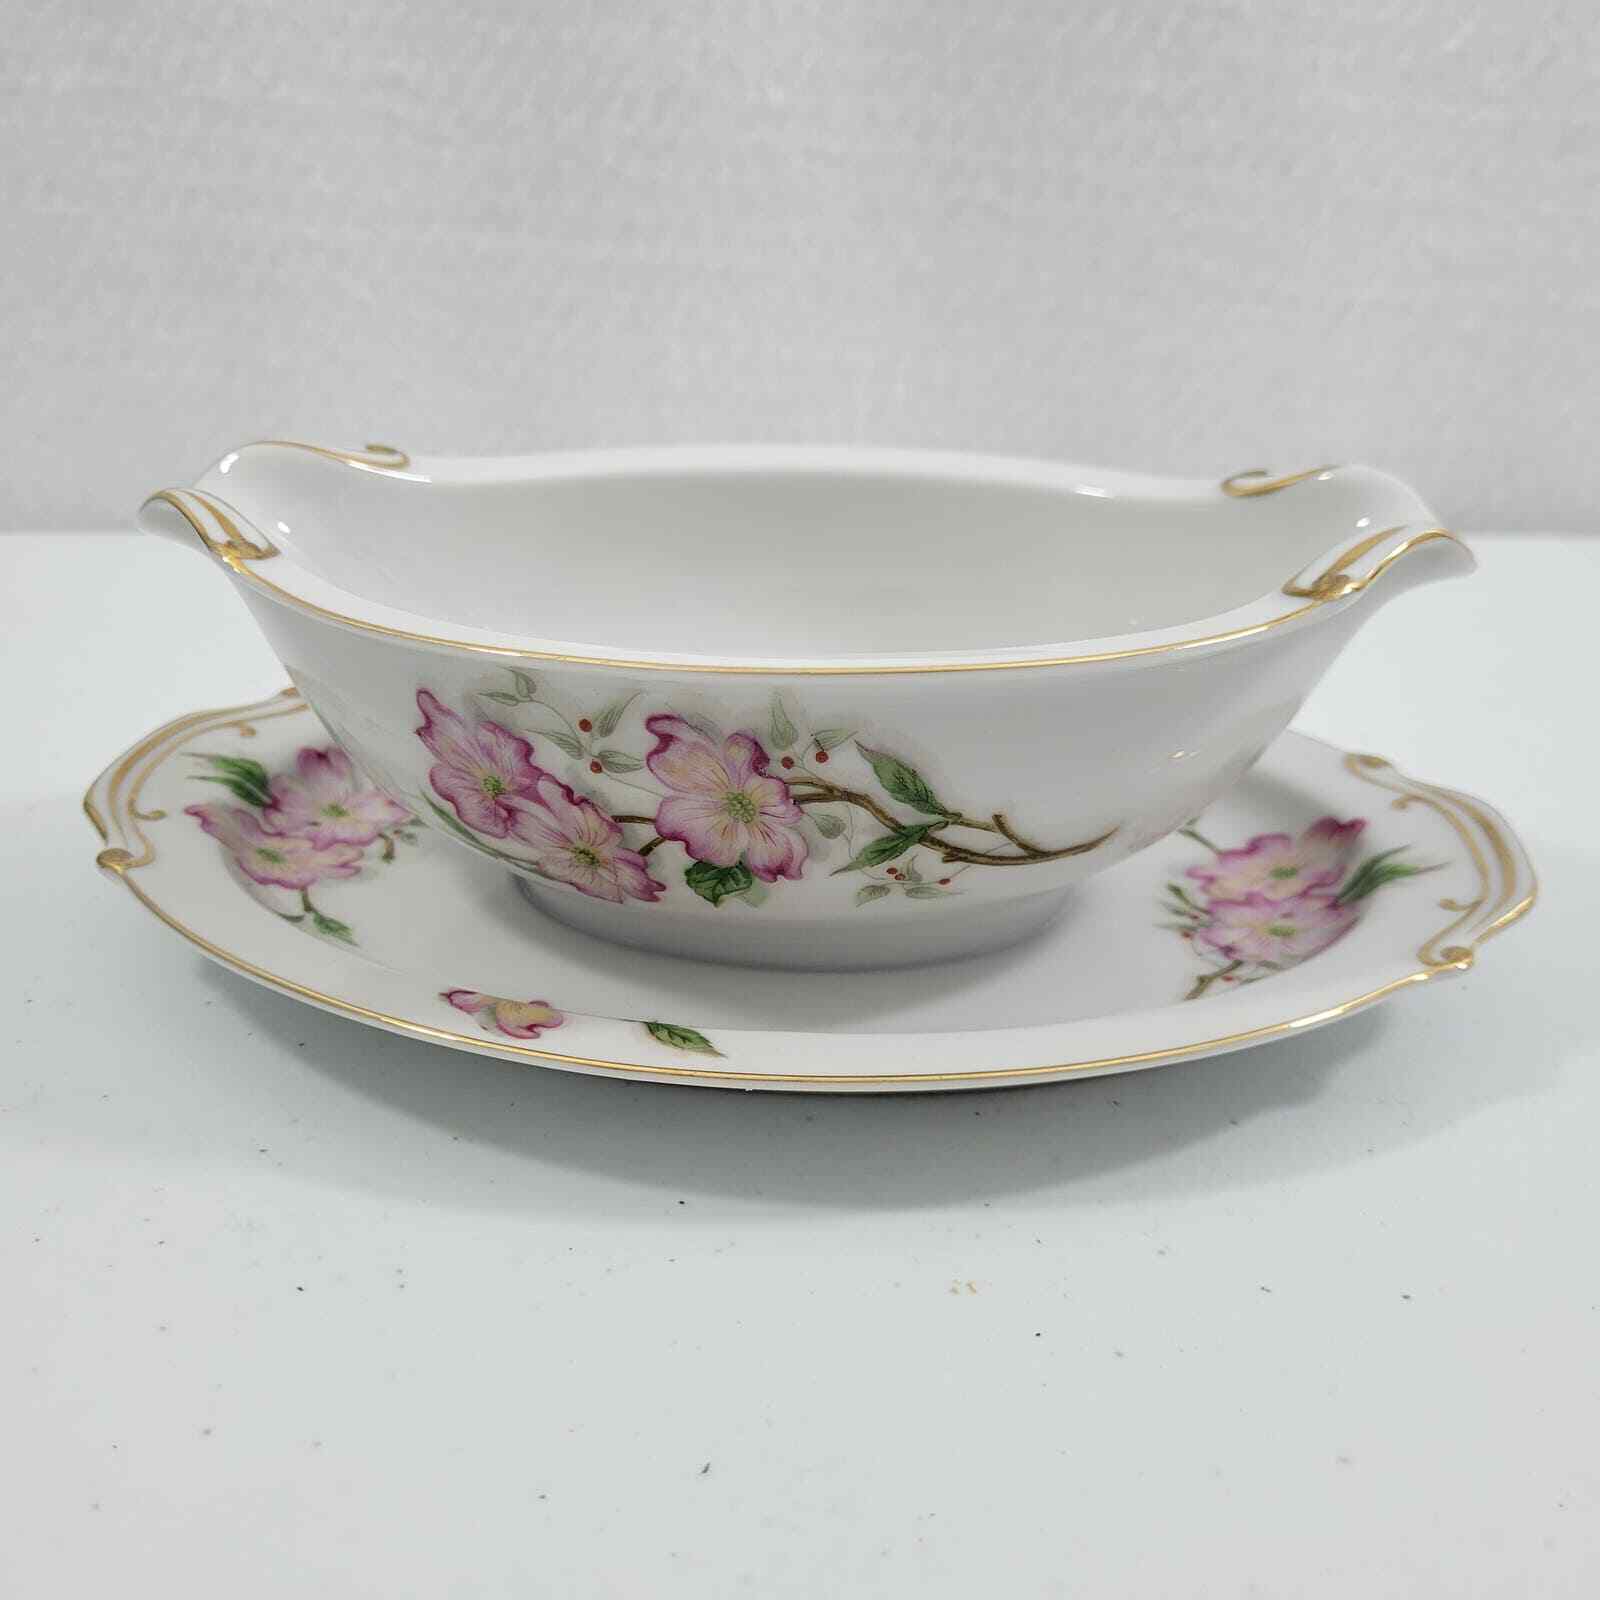 Imperial China Vintage Japan Gravy Bowl With Attached Underplate 12324-1TClo